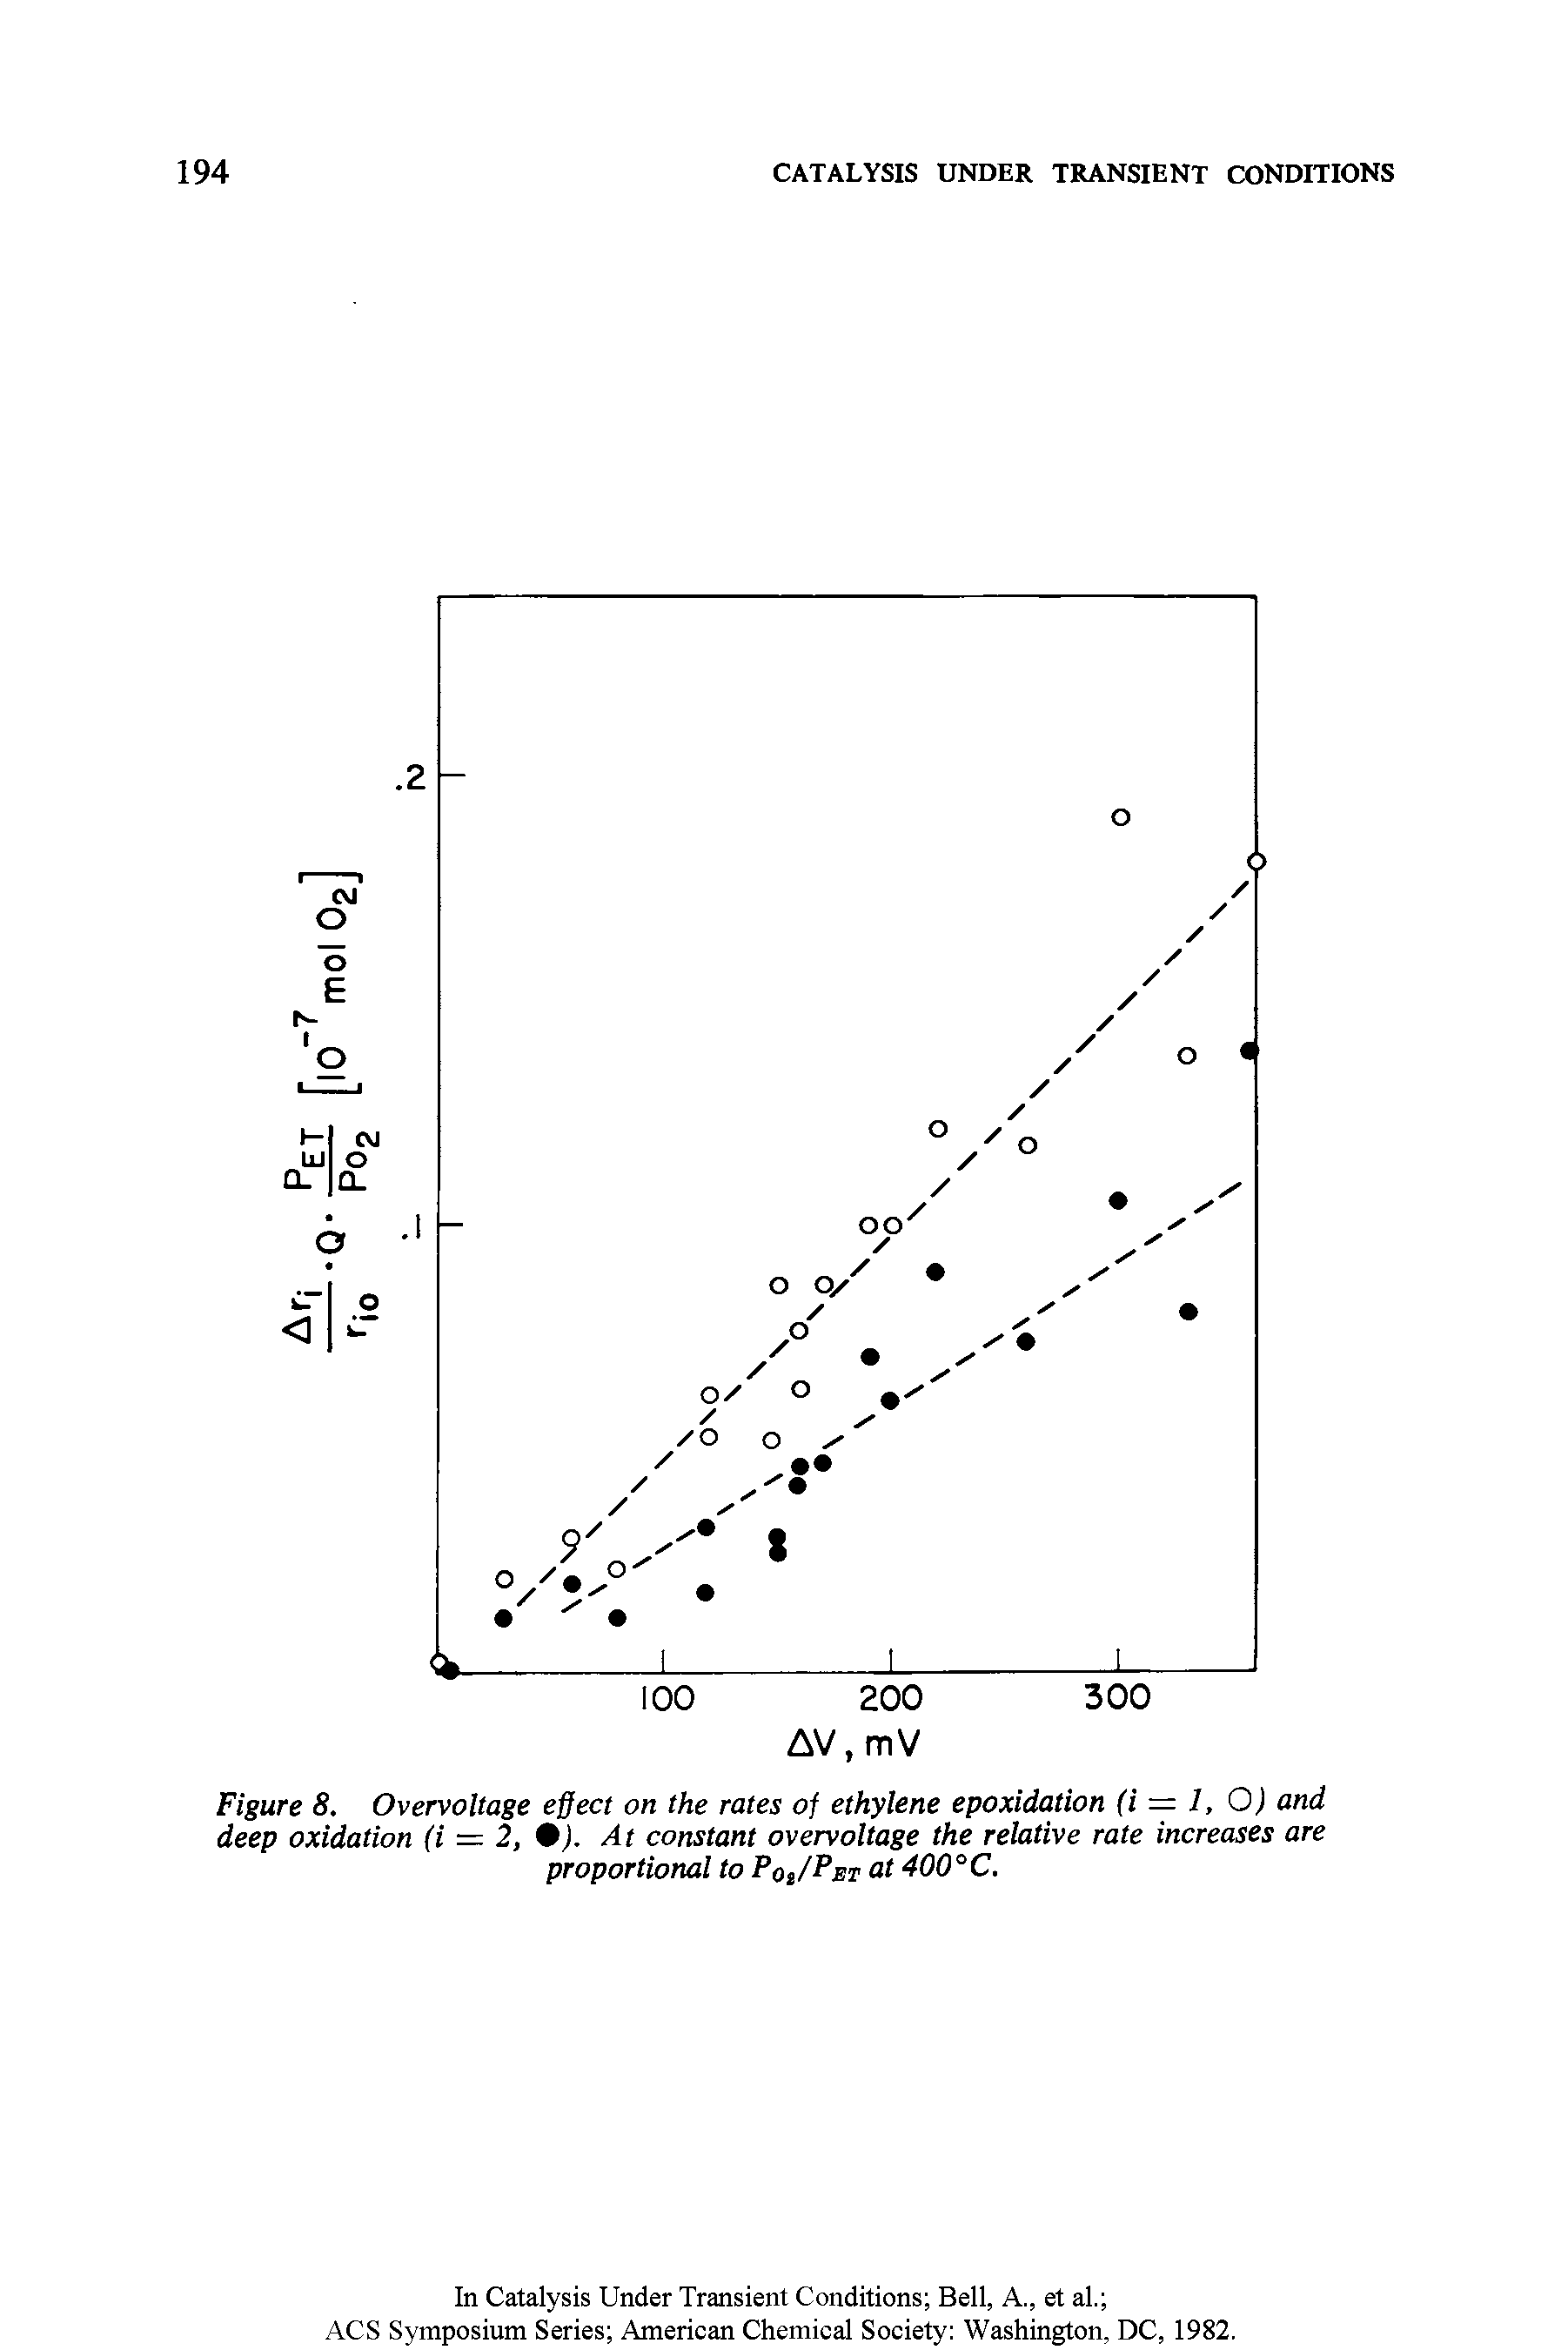 Figure 8. Overvoltage effect on the rates of ethylene epoxidation (i = 1, 0) and deep oxidation (i = 2, 9). At constant overvoltage the relative rate increases are proportional to Pqi/Pet at 400°C.